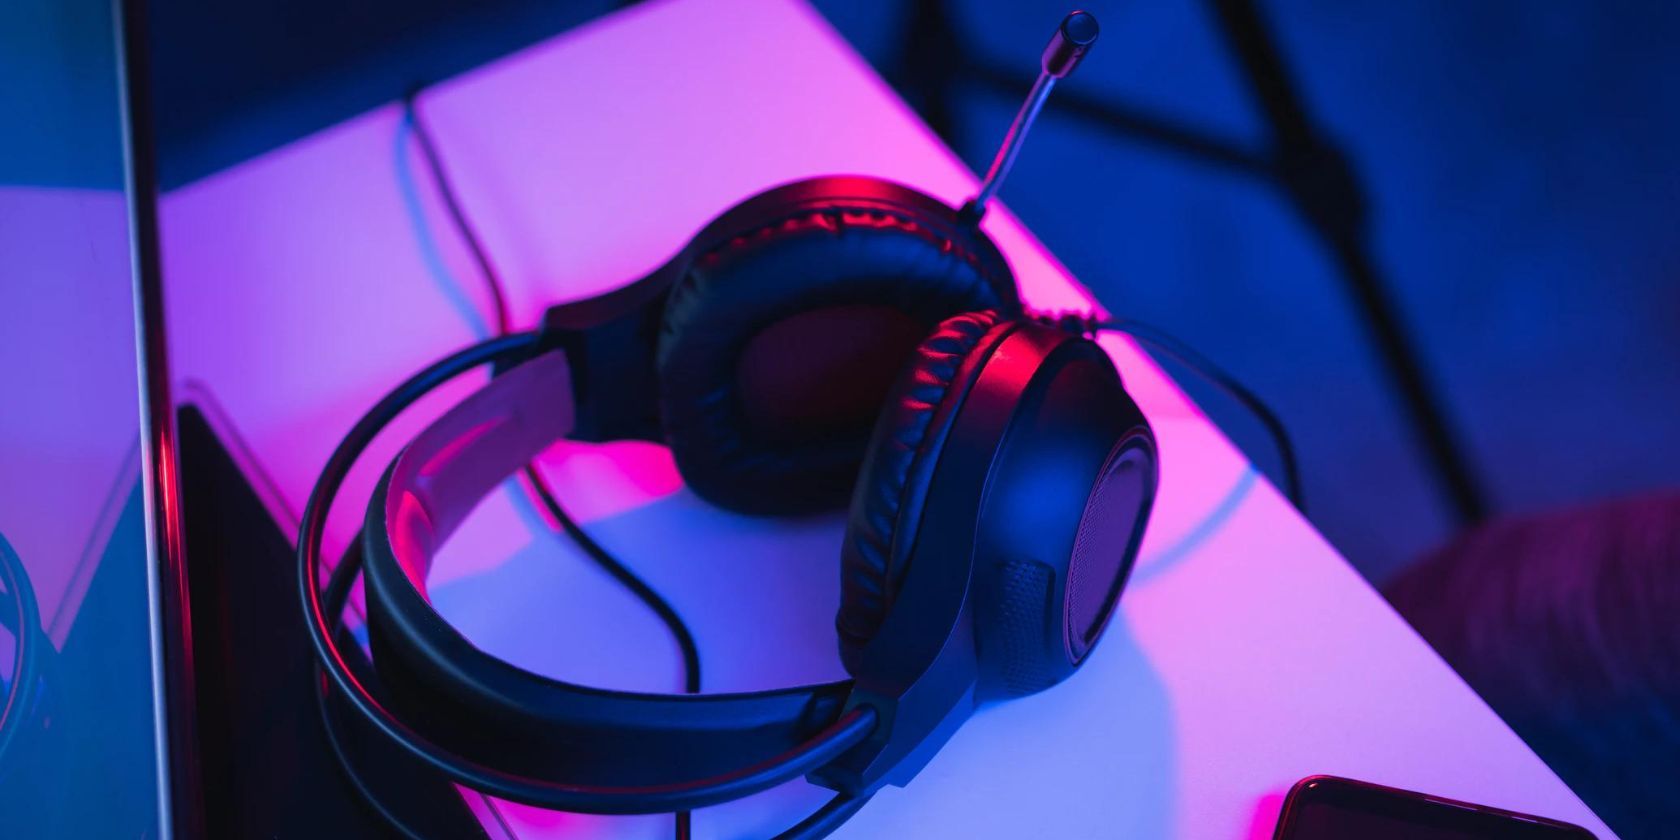 A gaming headset sitting on a table with purple RGB lights